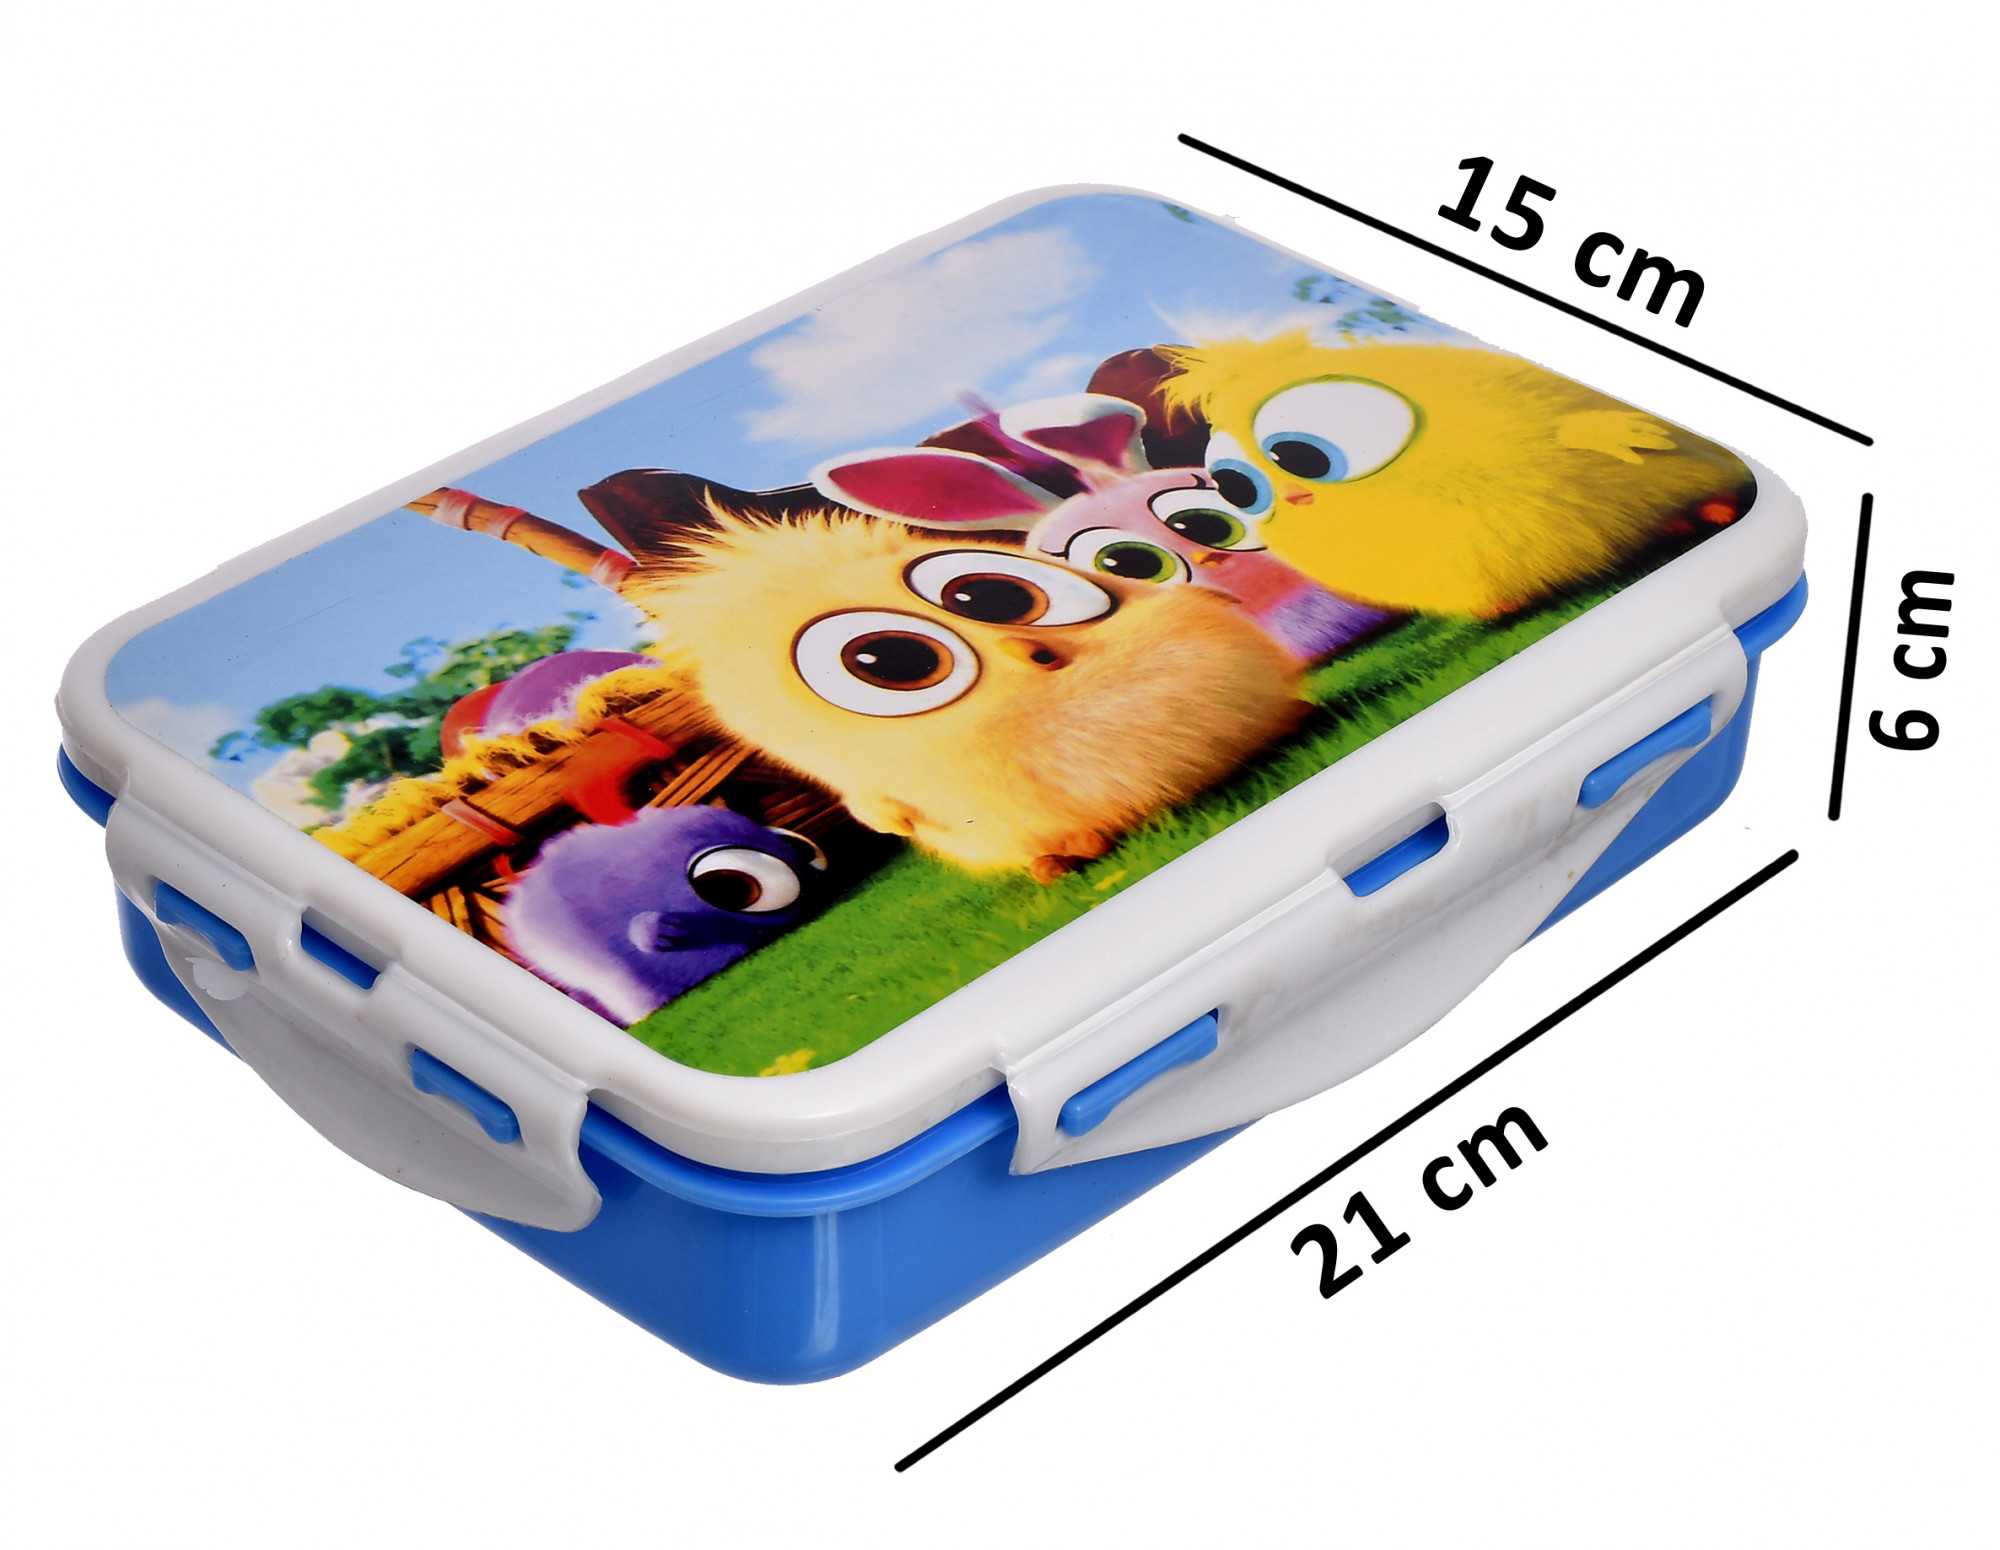 Kuber Industries Model-501 Unbreakable Plastic Large Airtight Leakproof Lunch Box/Tiffin (Blue)-KUBMART1310